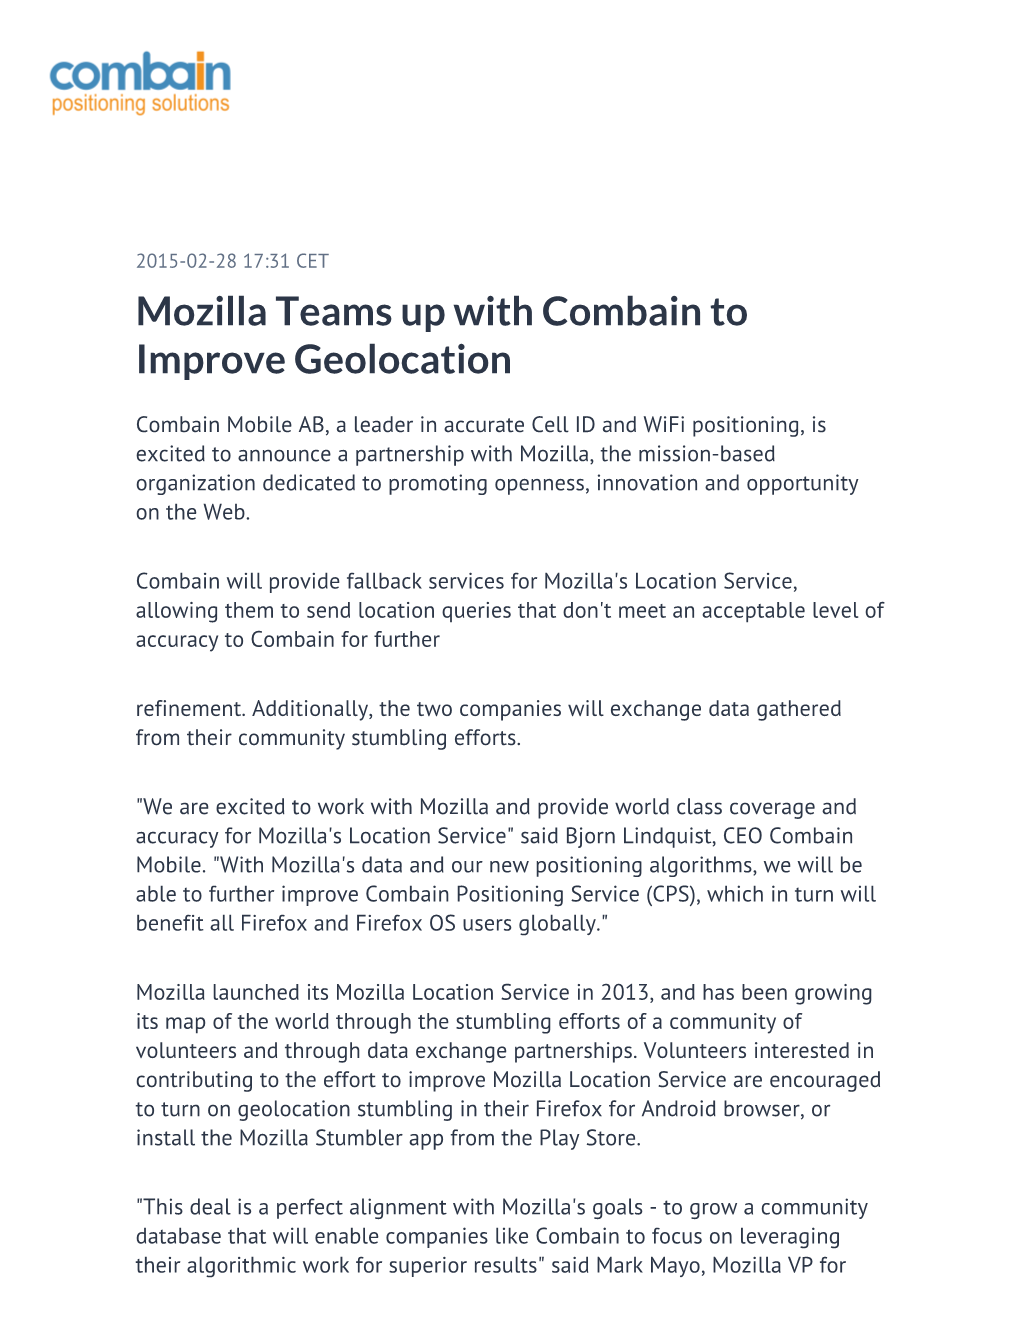 Mozilla Teams up with Combain to Improve Geolocation